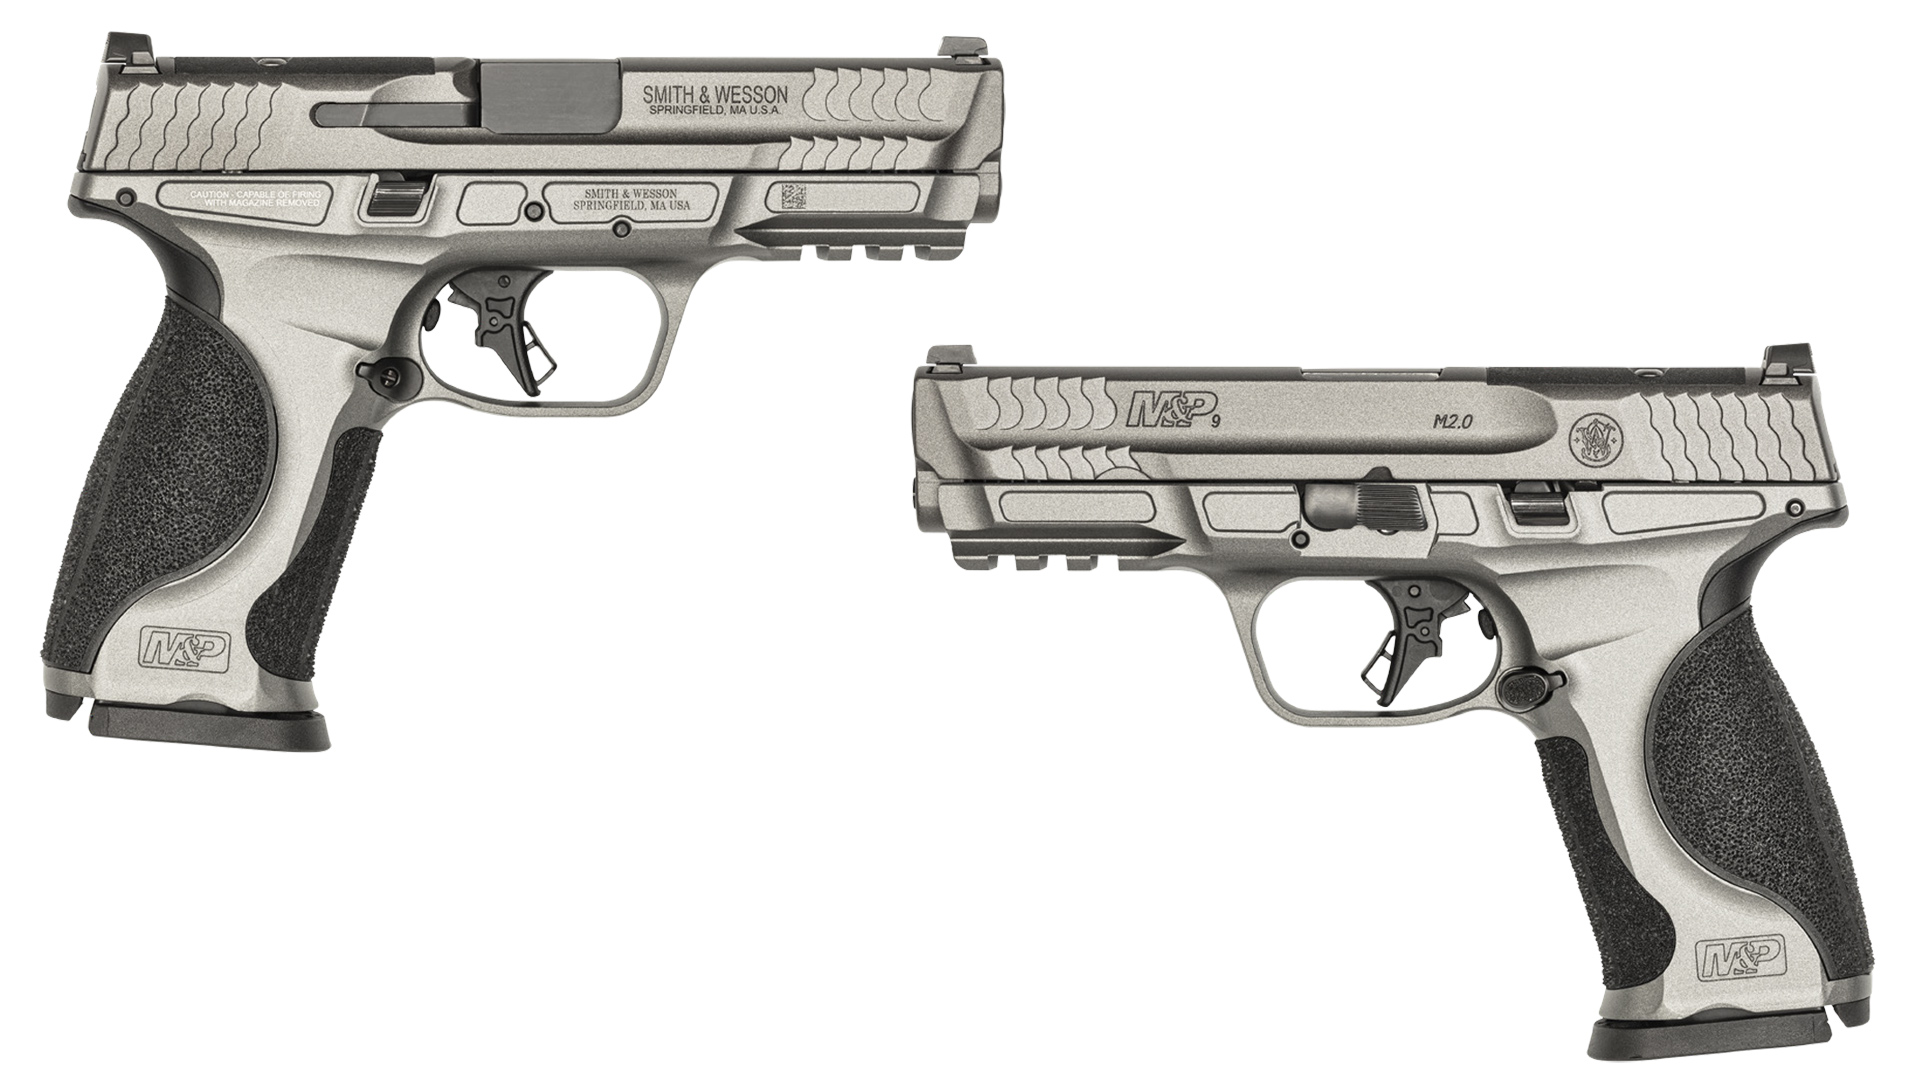 Smith &amp; Wesson M&amp;P9 M2.0 METAL pistols, side by side